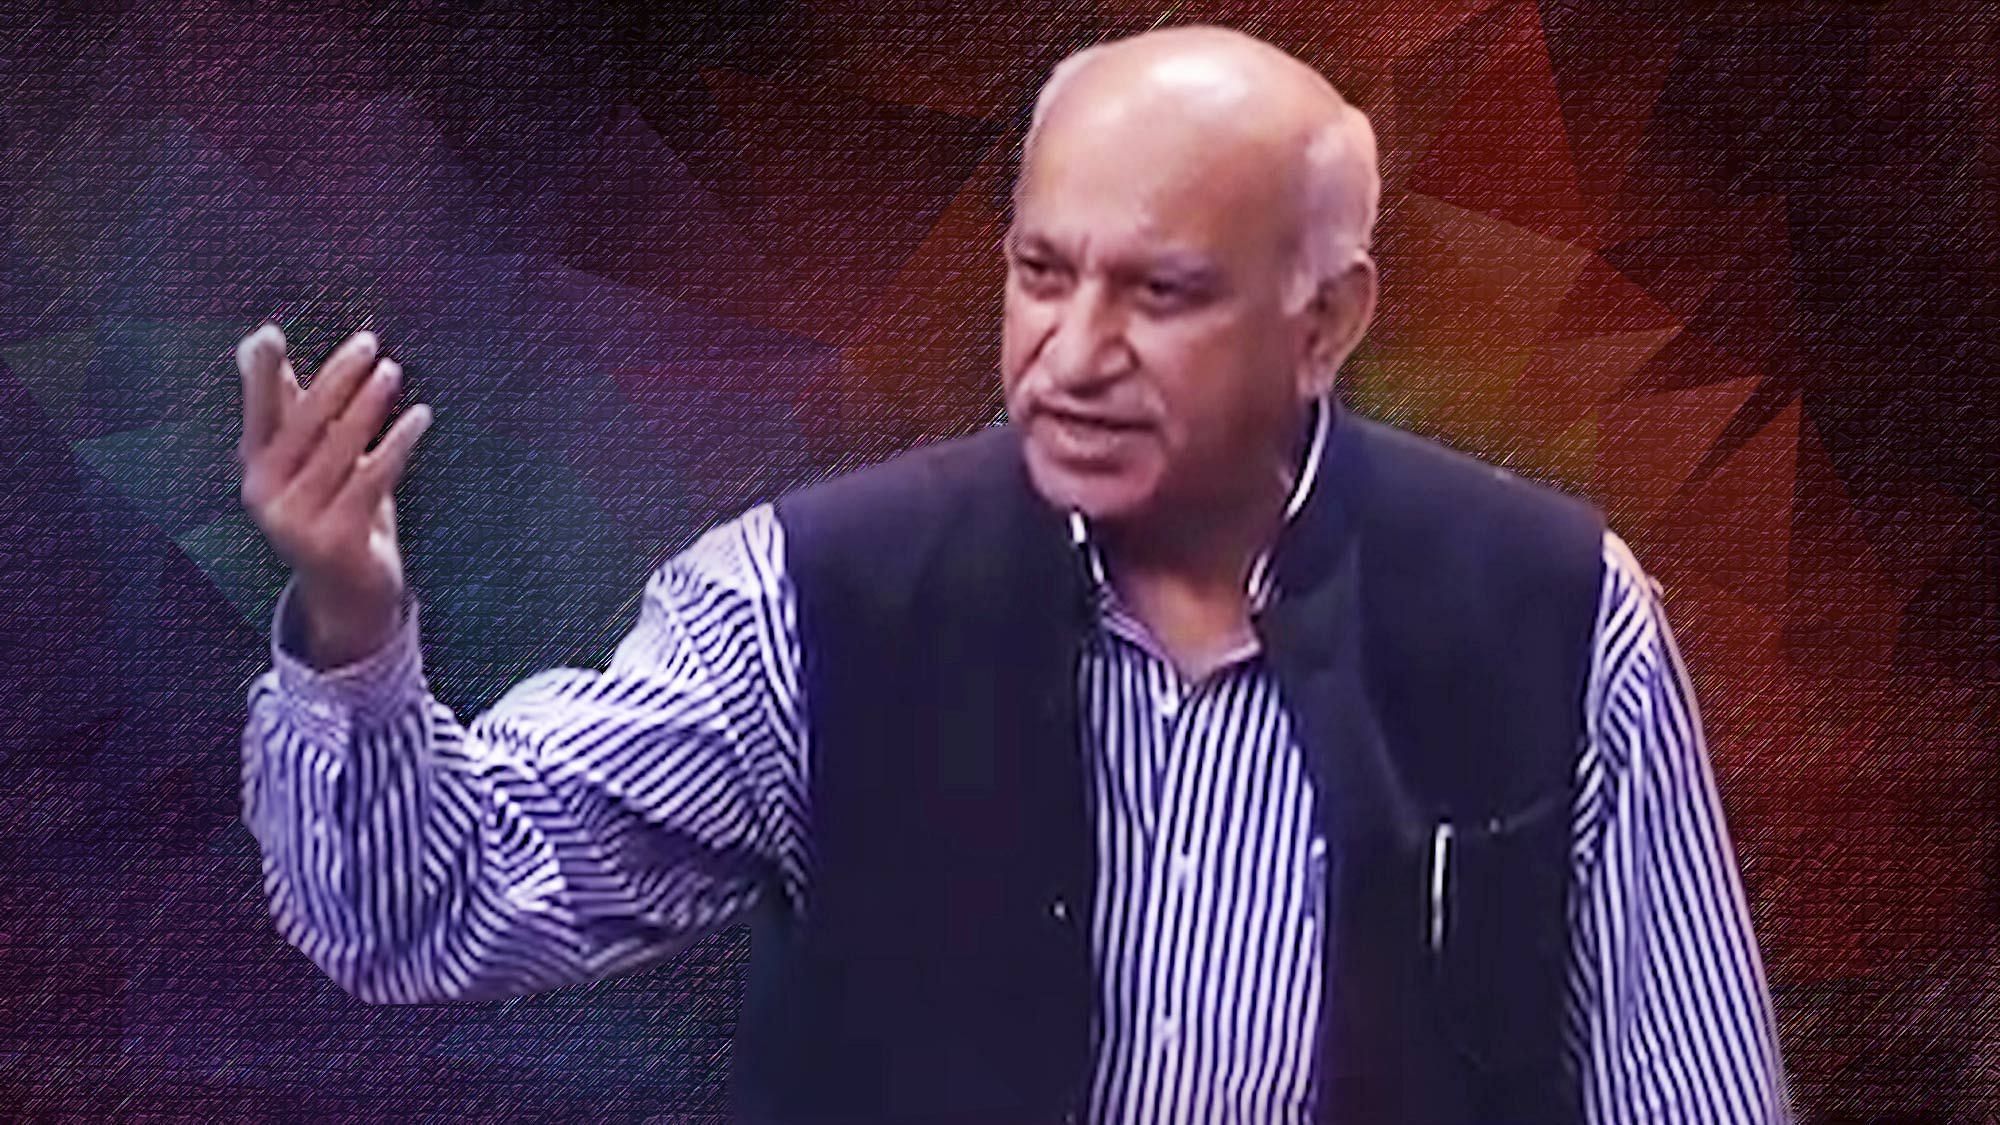 The cross-examination of witnesses appearing in support of former Union minister M J Akbar in his criminal defamation case against scribe Priya Ramani concluded today.&nbsp;